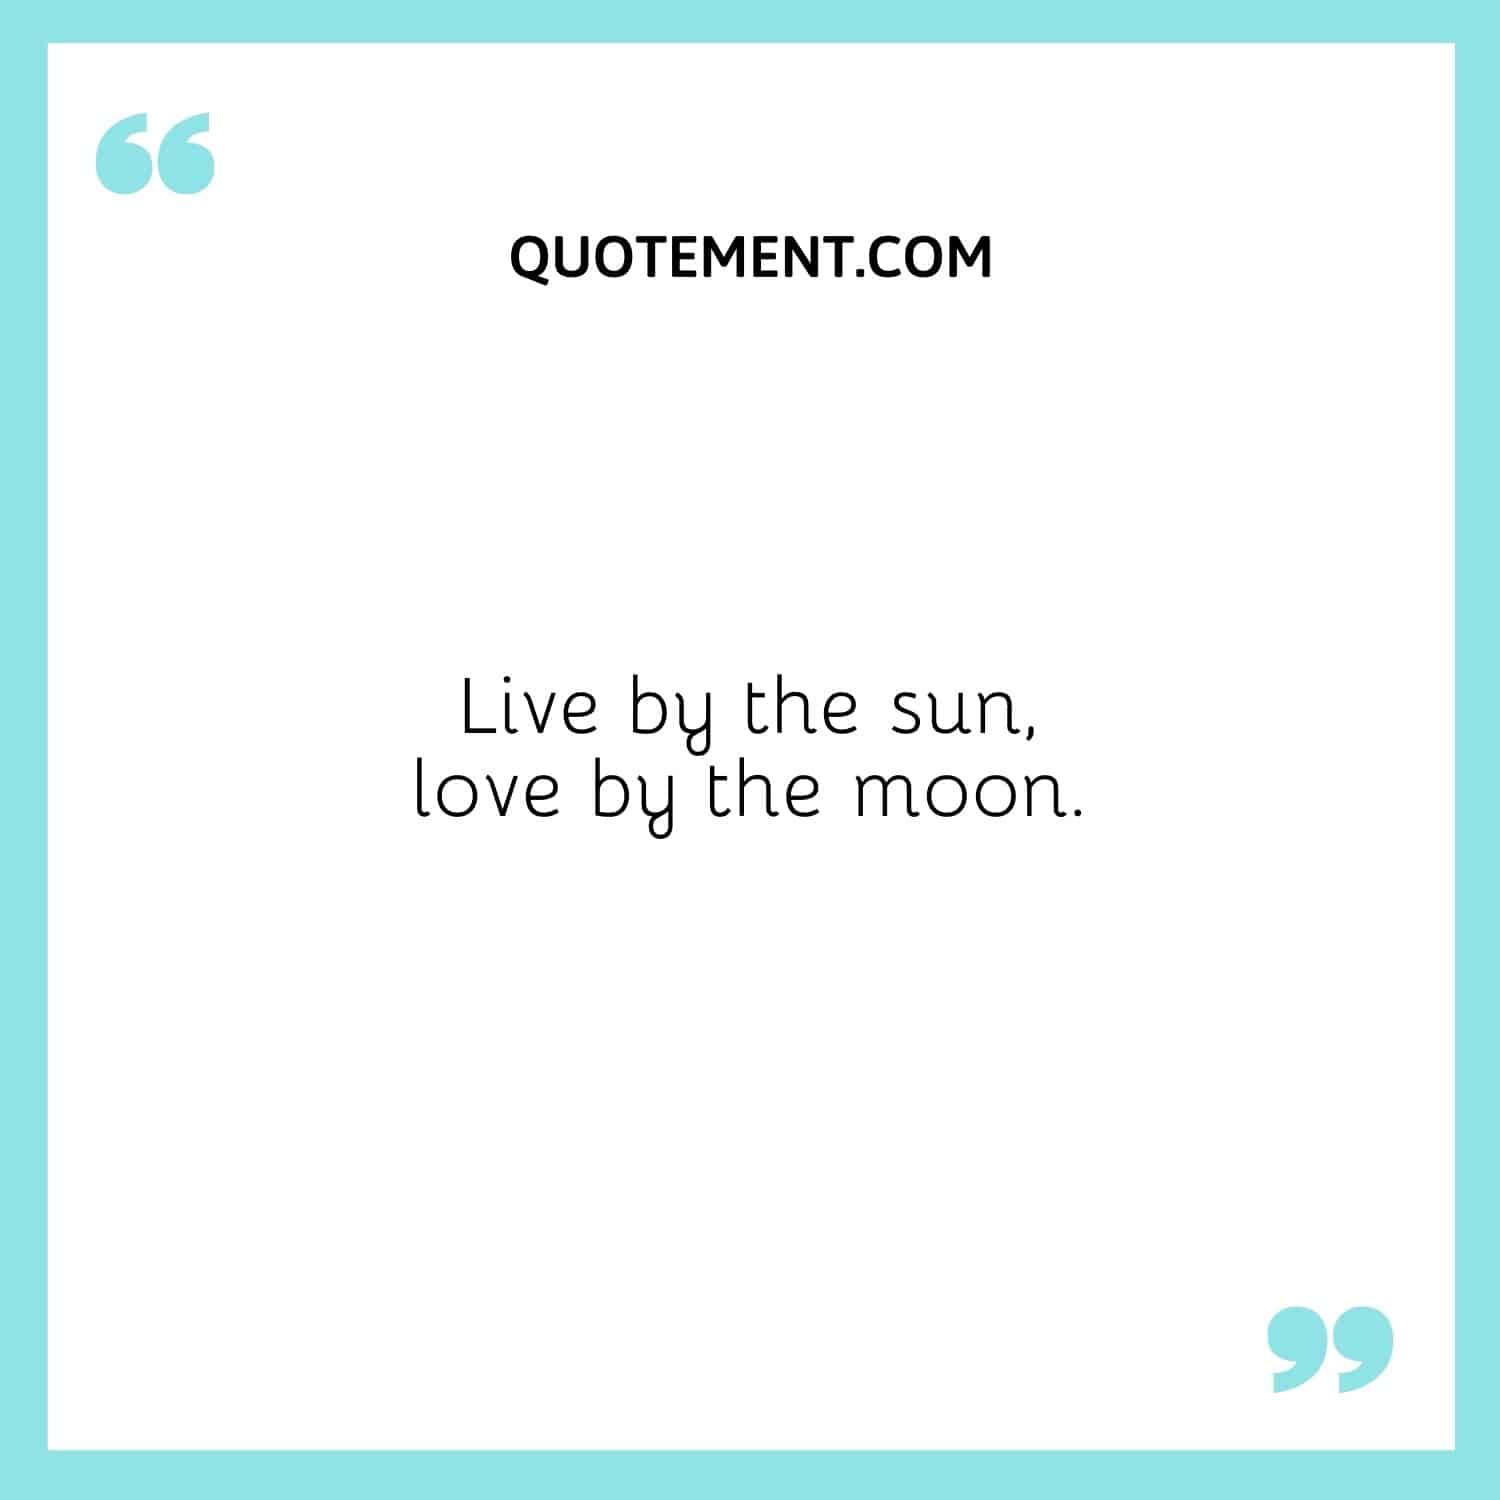 Live by the sun, love by the moon.